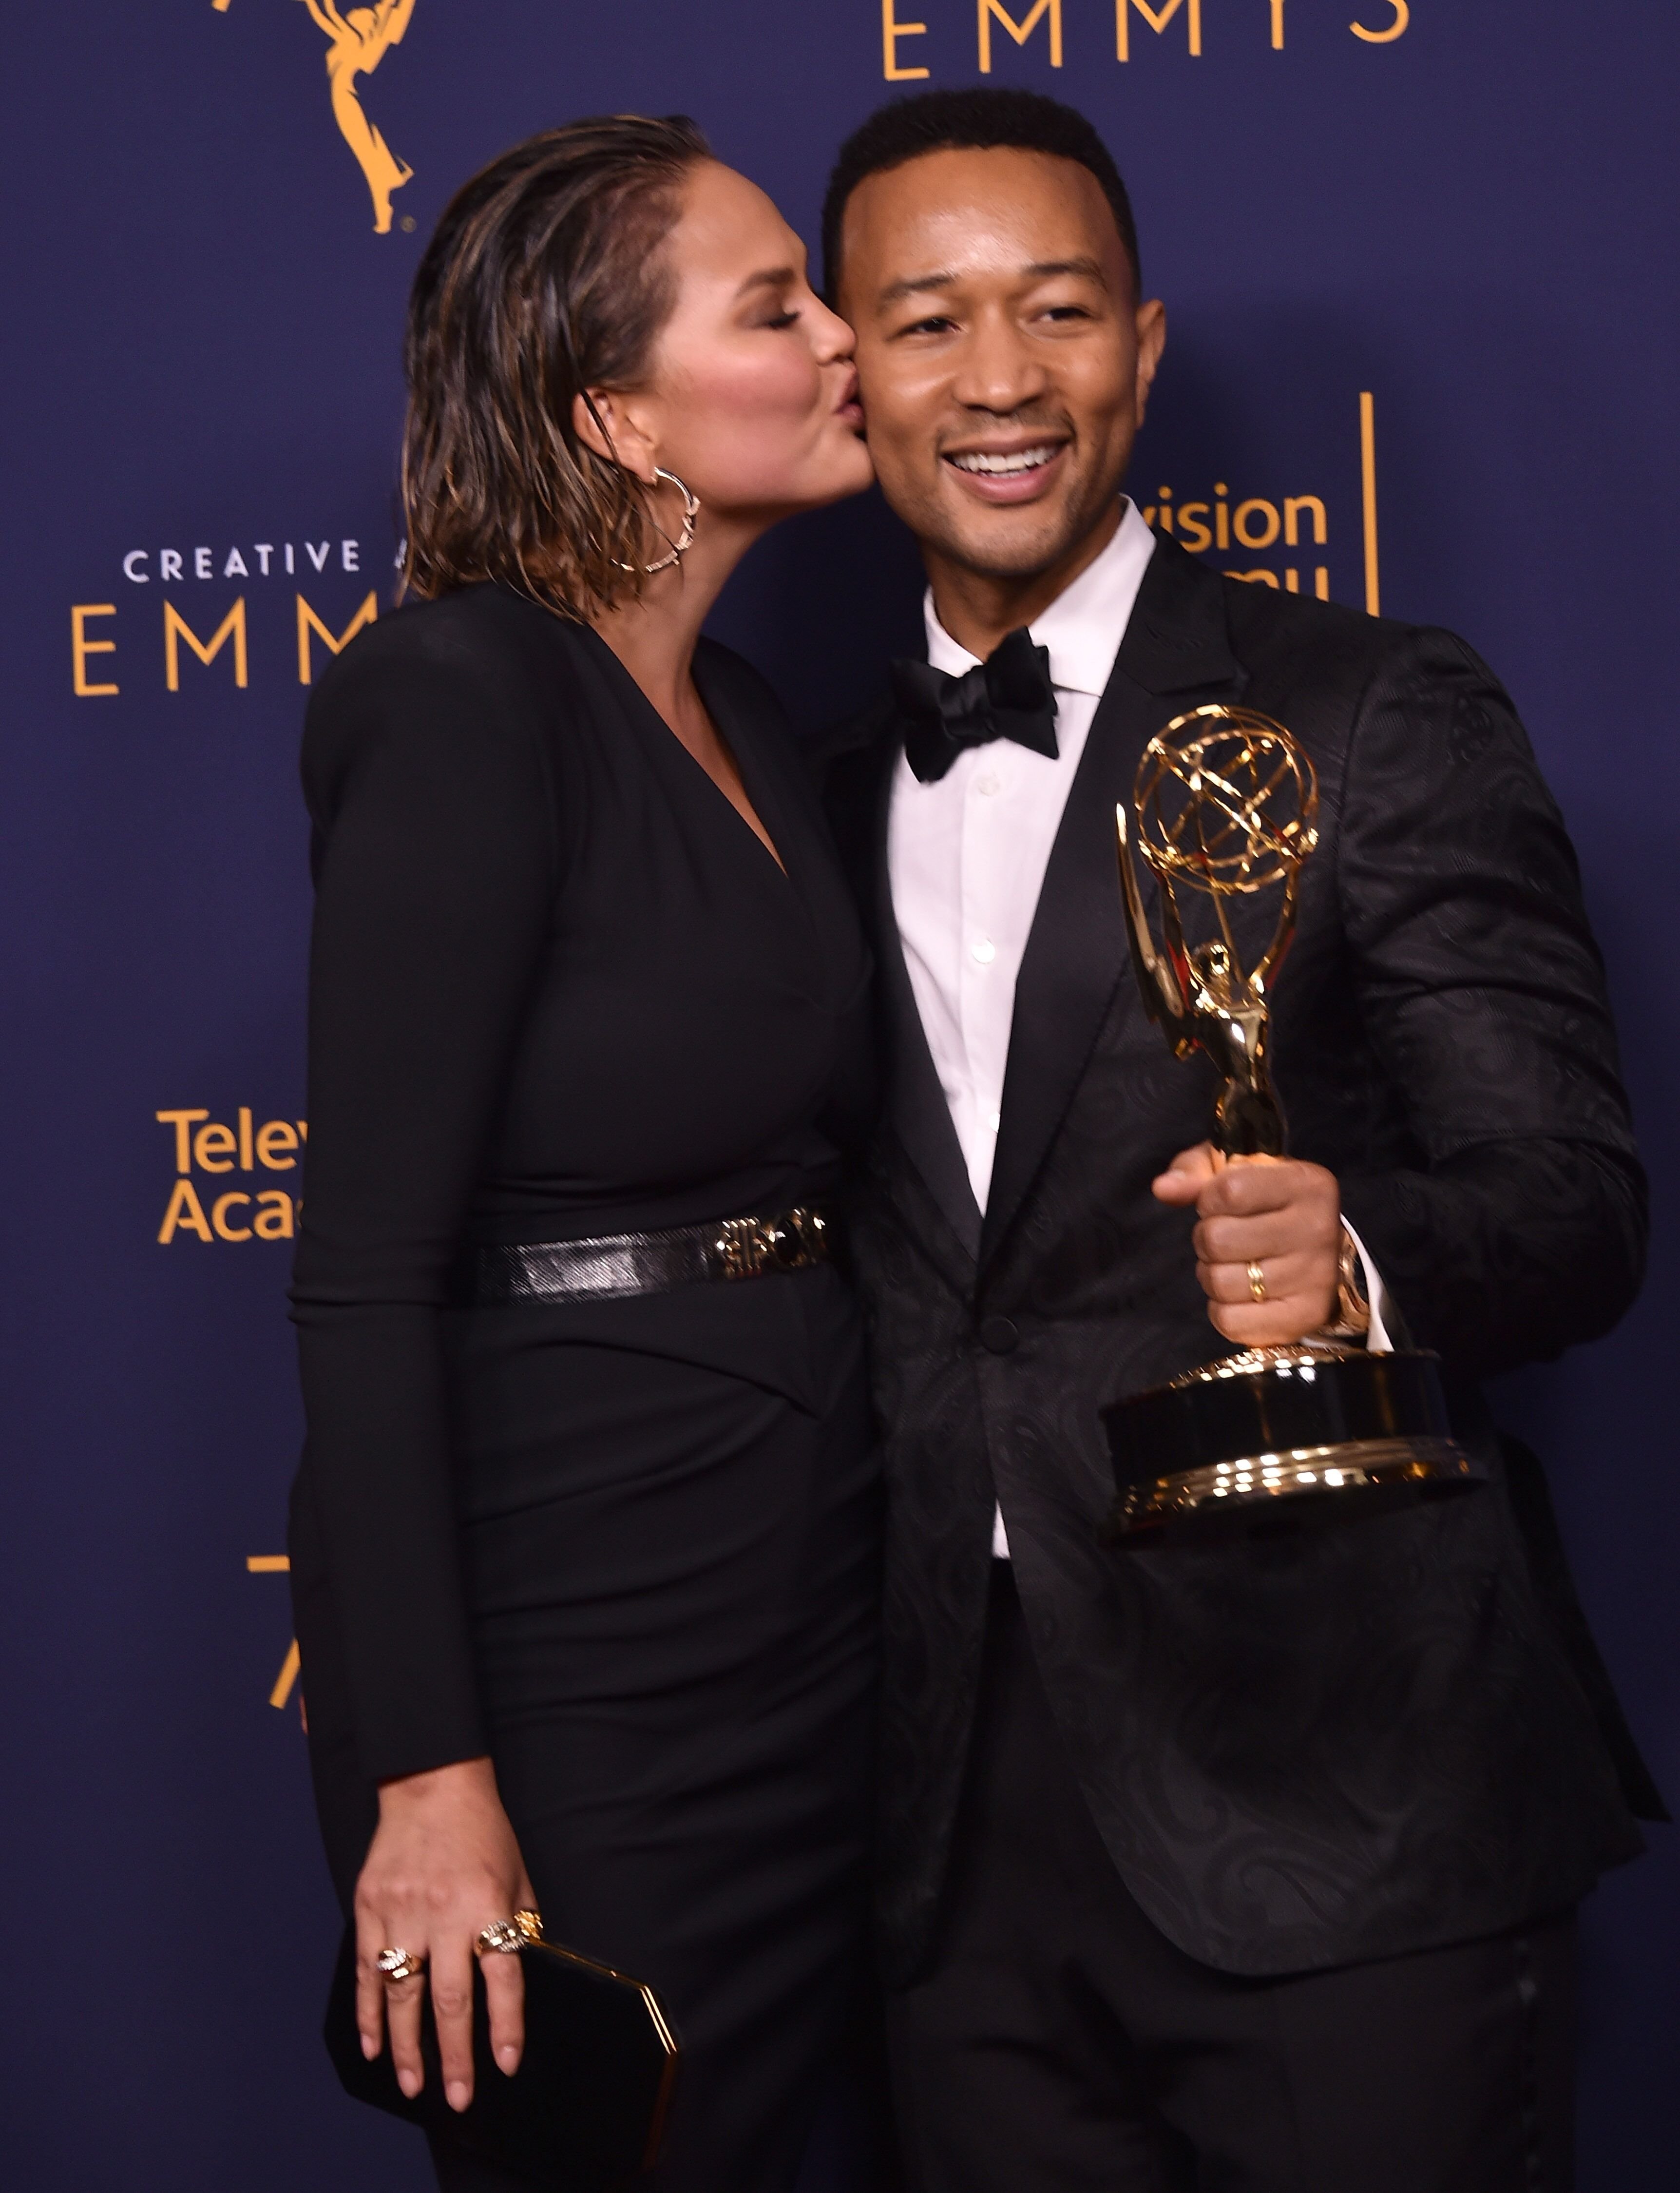 John Legend and Chrissy Teigen at the Emmys/ Source: Getty Images